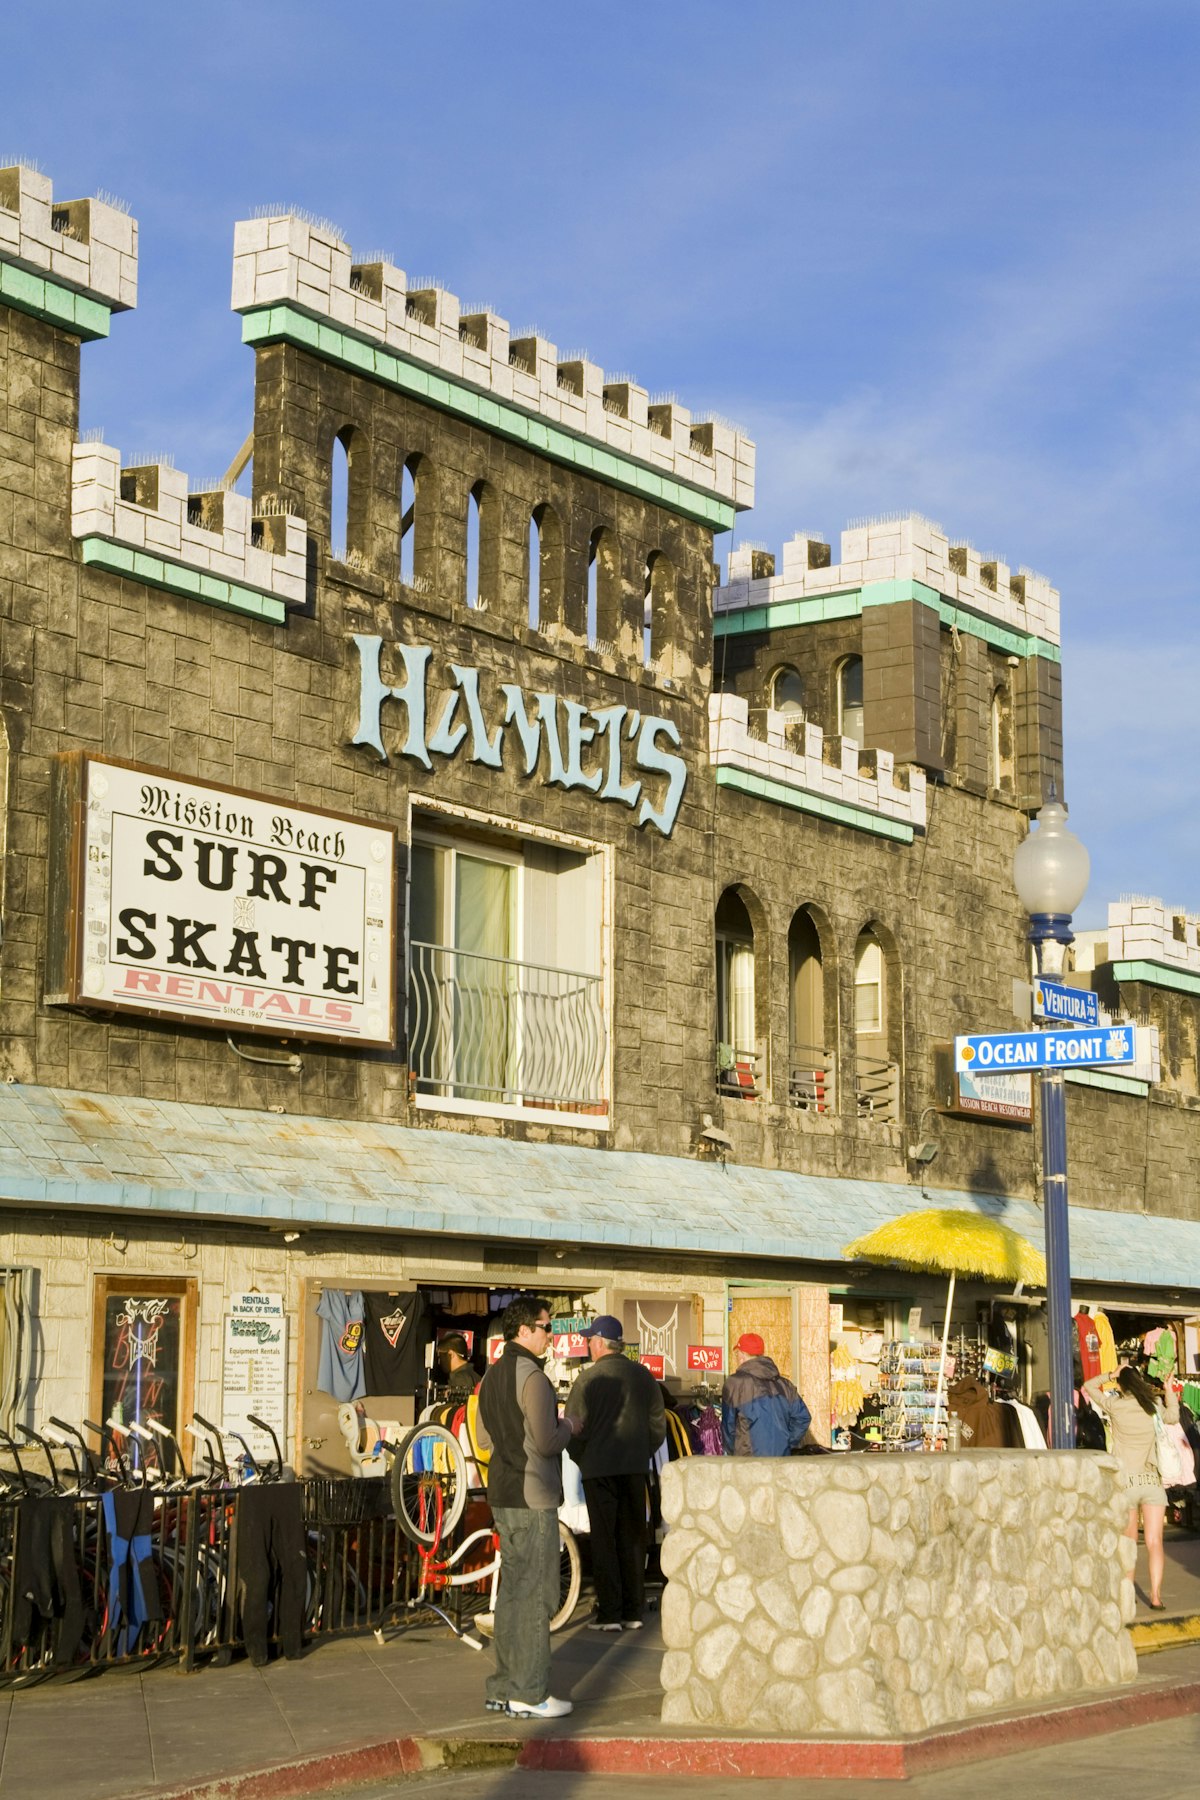 Hamel's surf and skate store on Mission Beach.